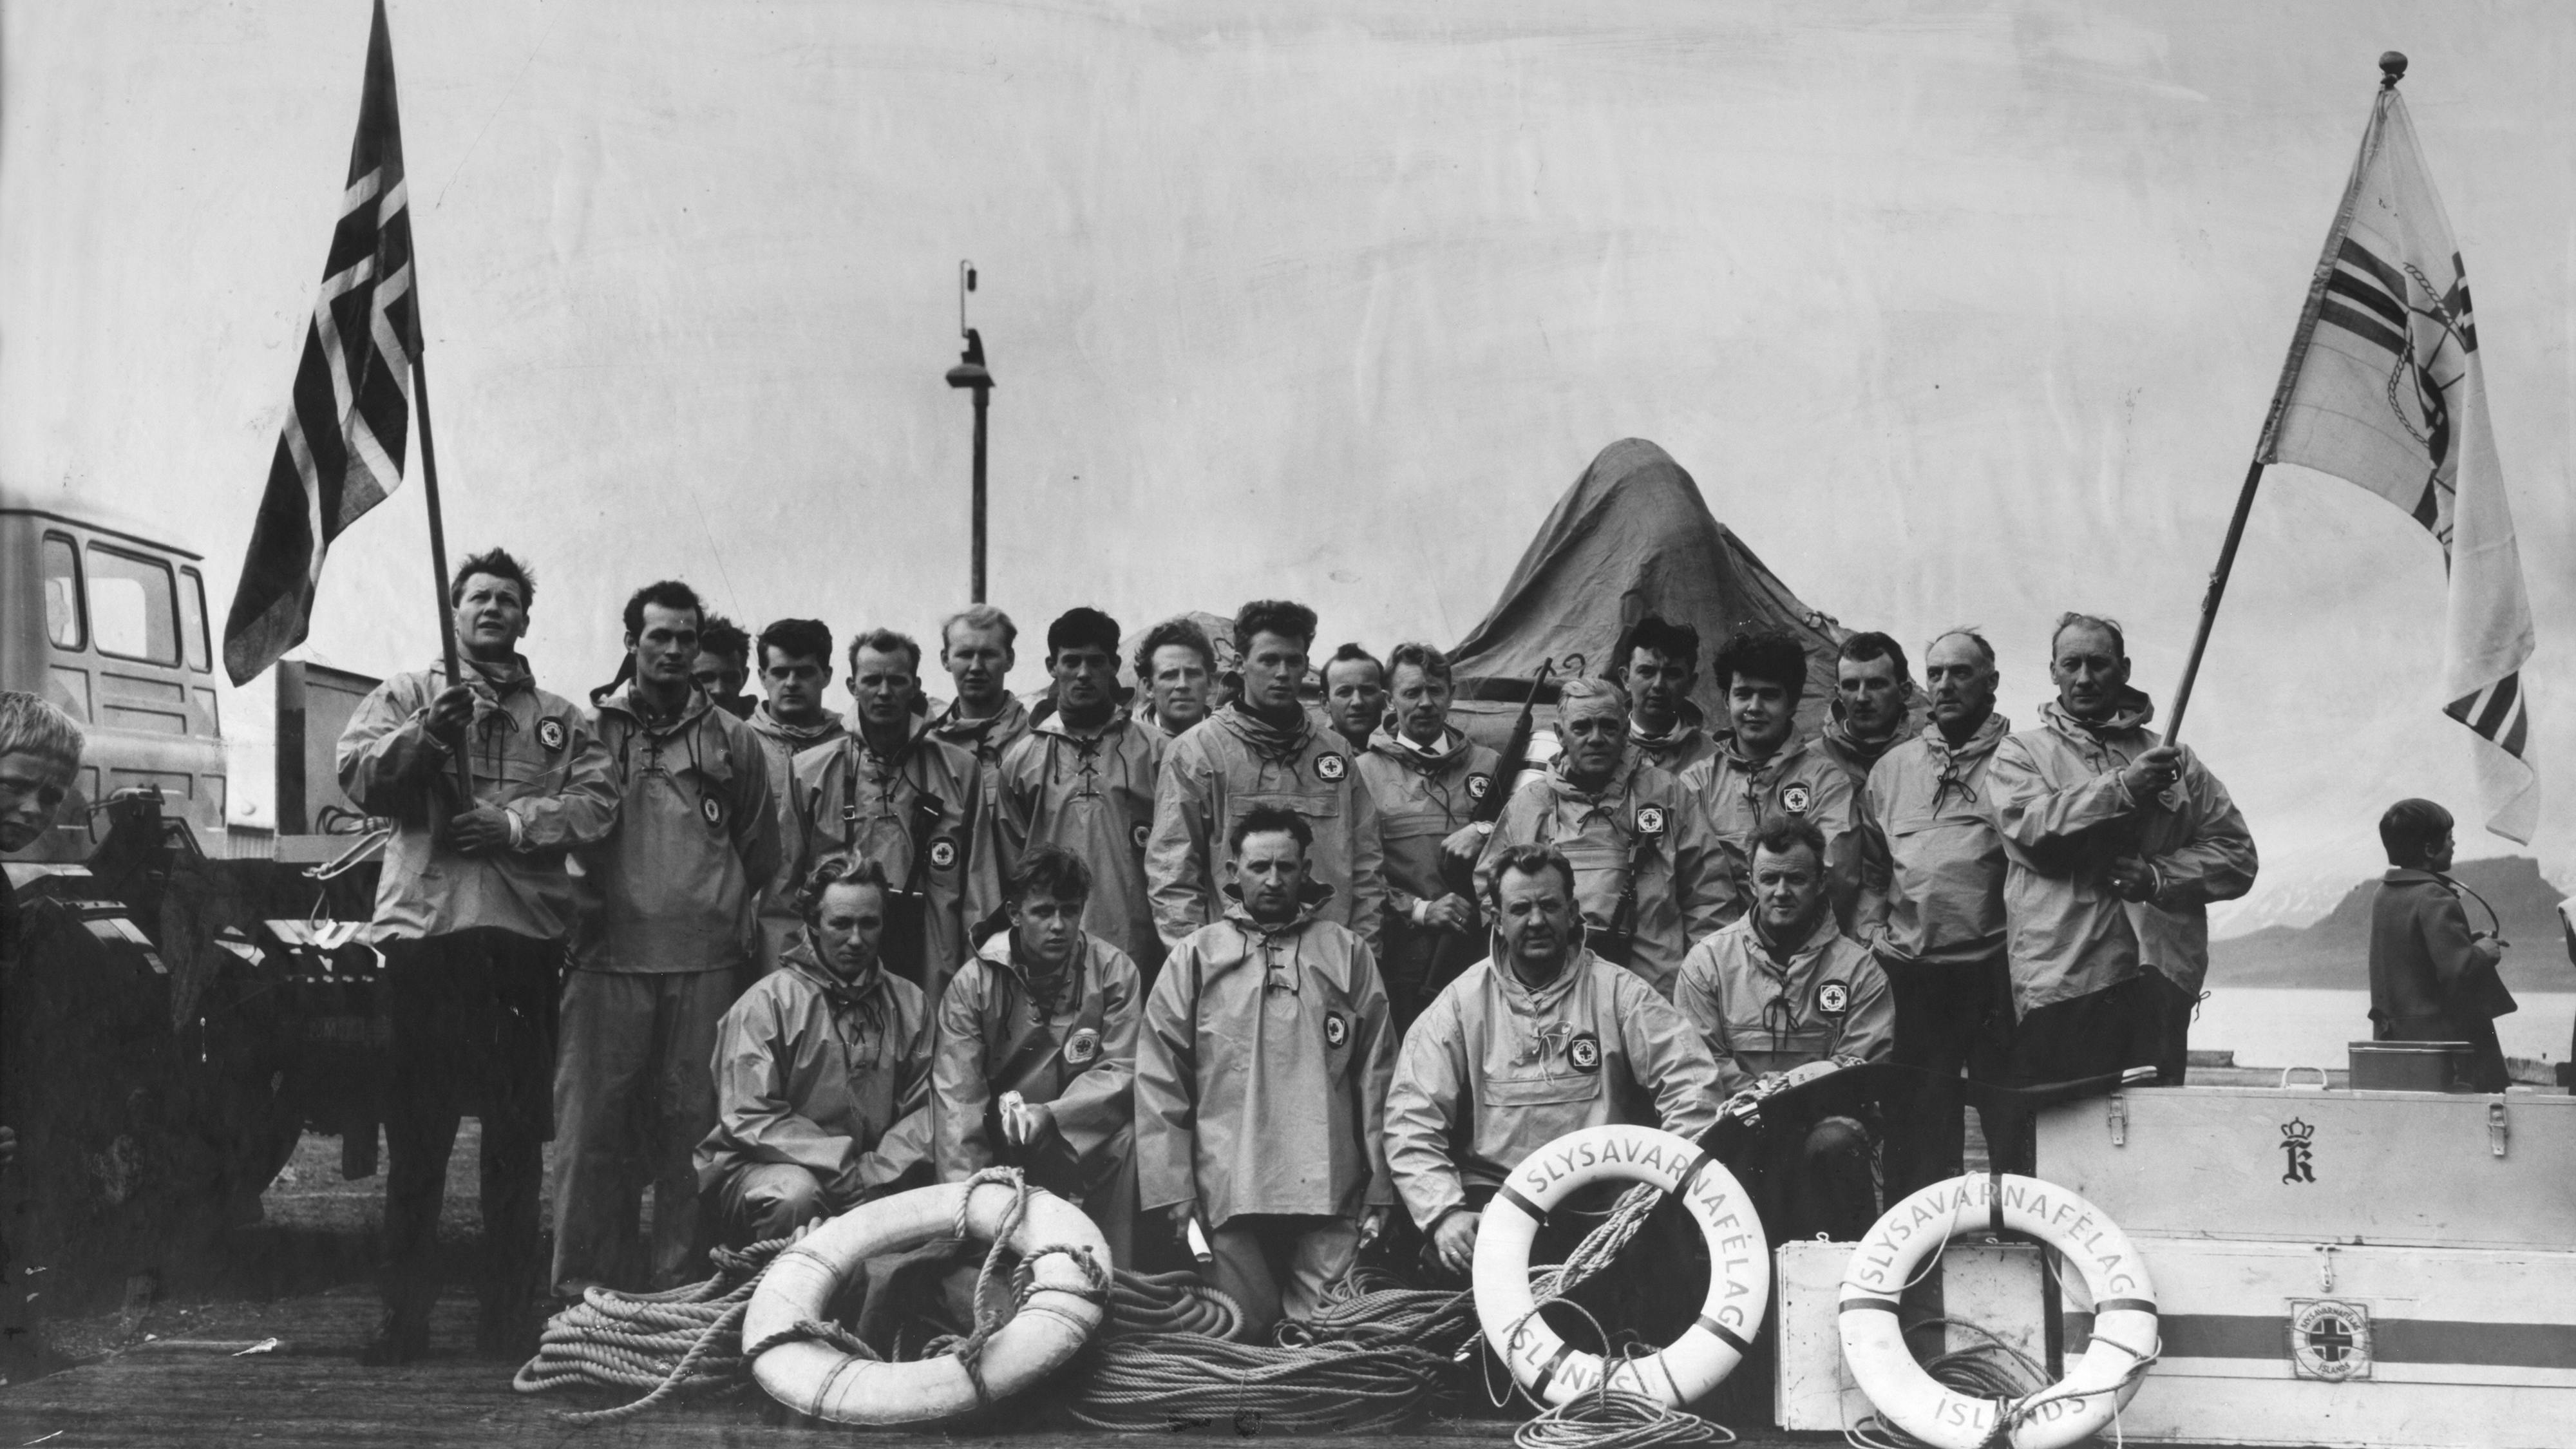 Icelandic Search and rescue team from 1967